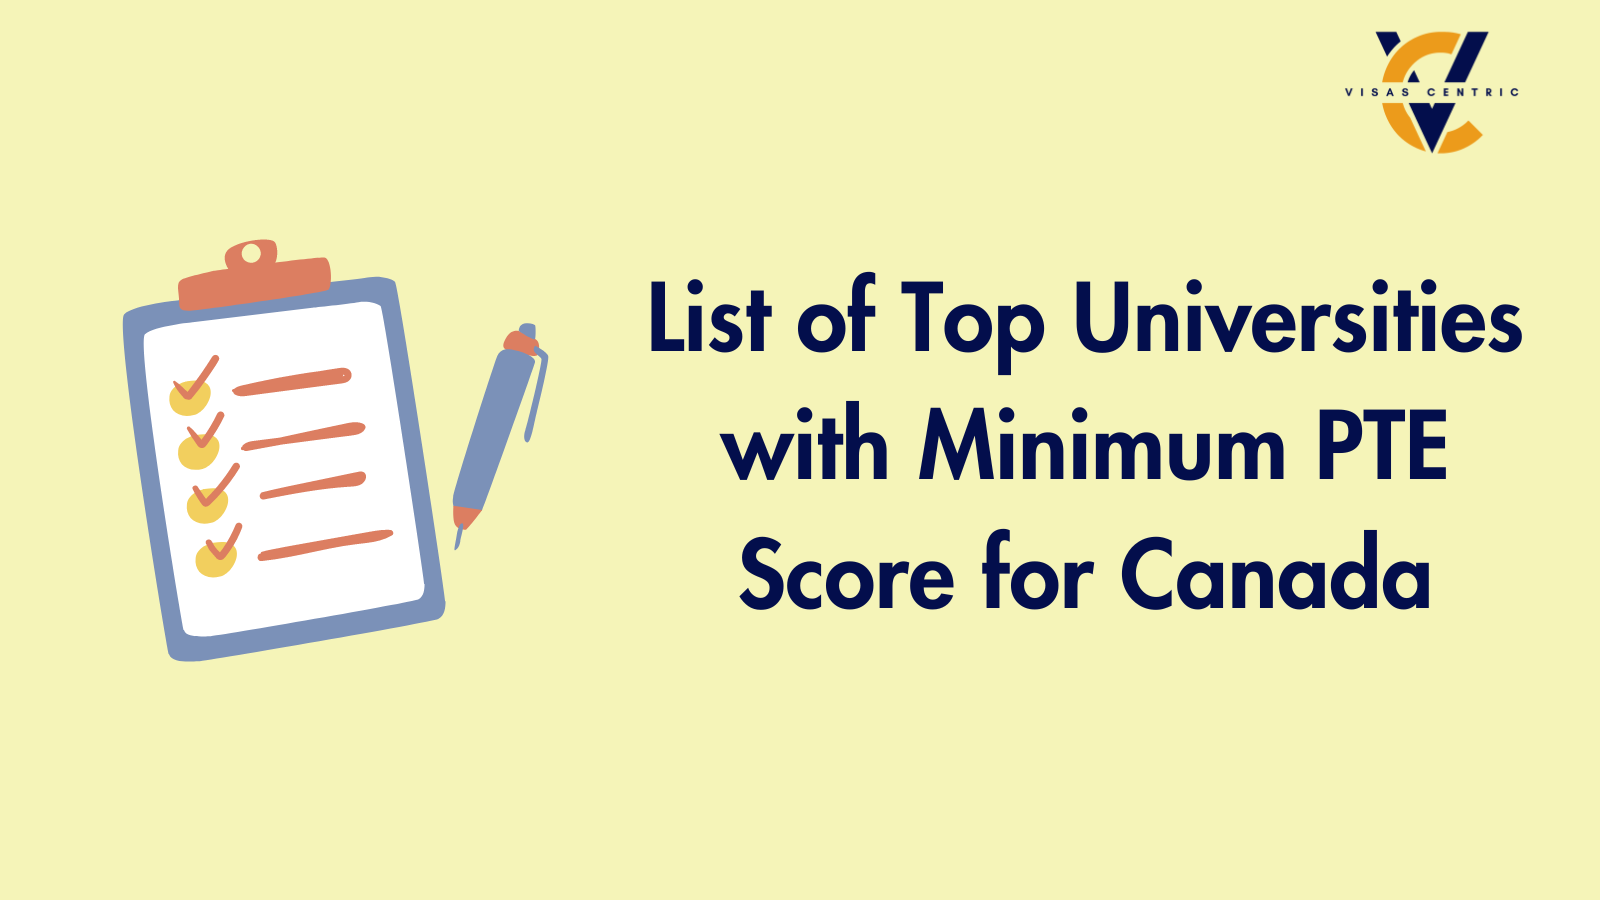 List of Top Universities with Minimum PTE Score for Canada